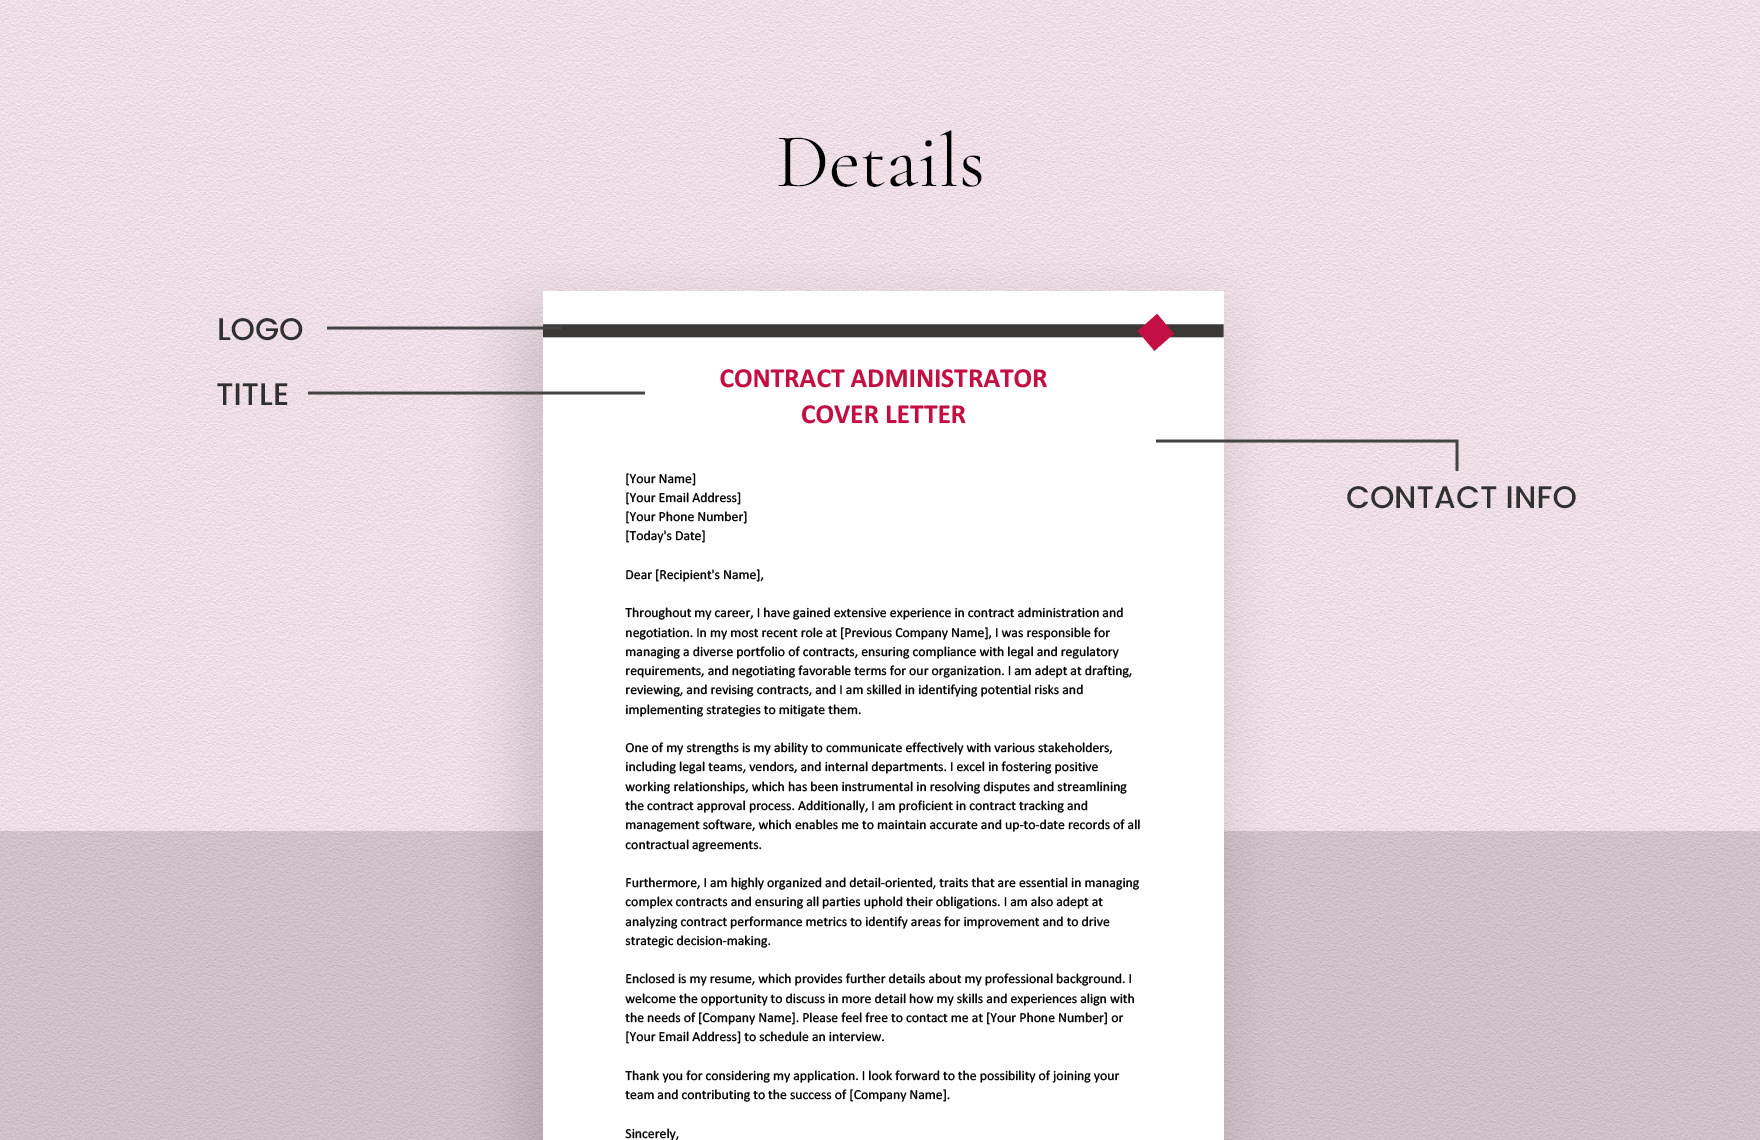 Contract Administrator Cover Letter